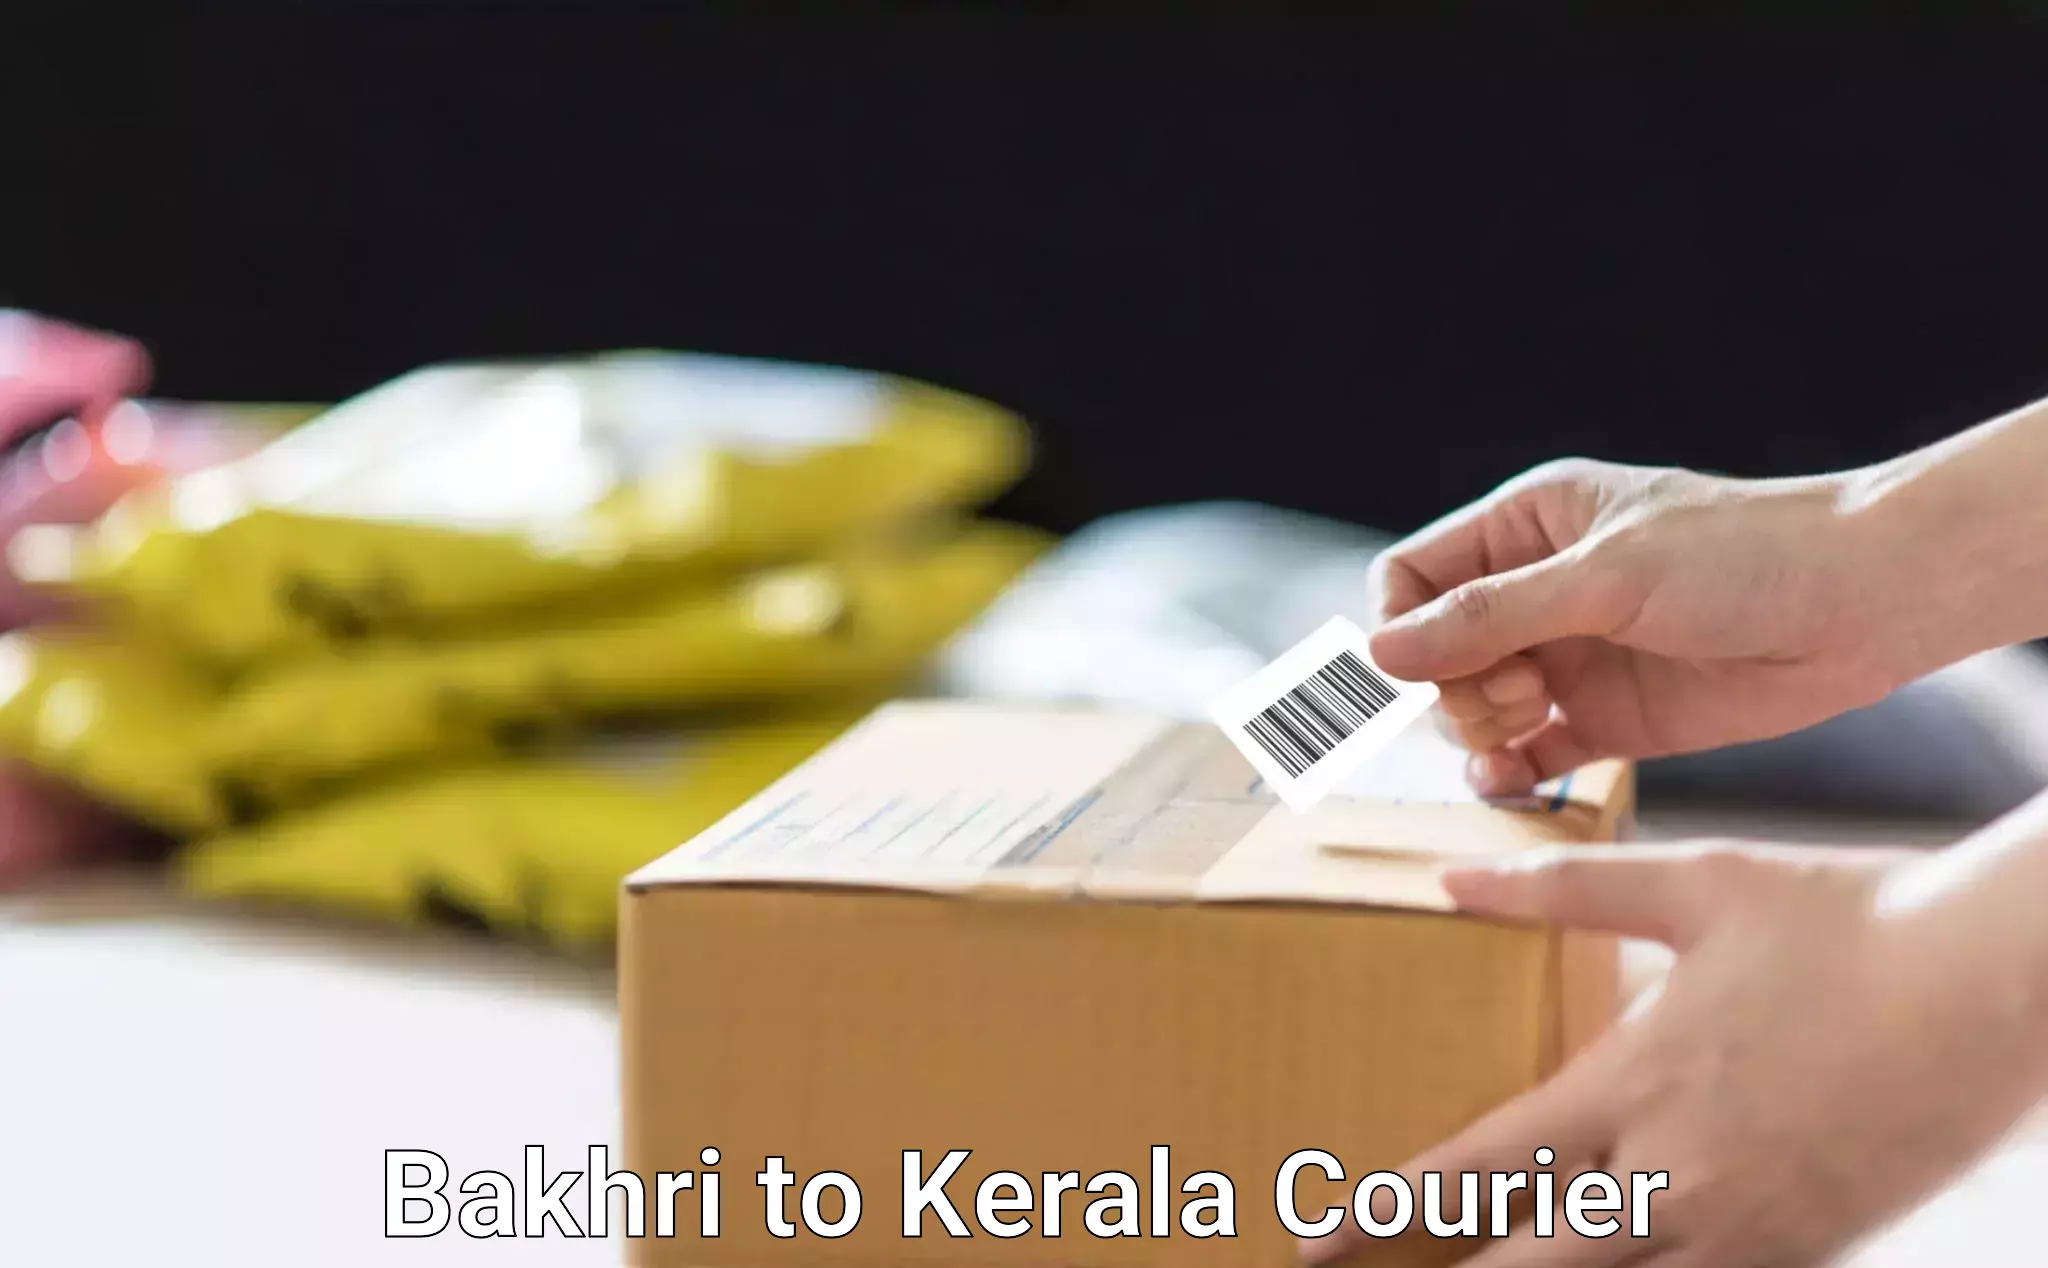 Efficient moving and packing Bakhri to Kerala